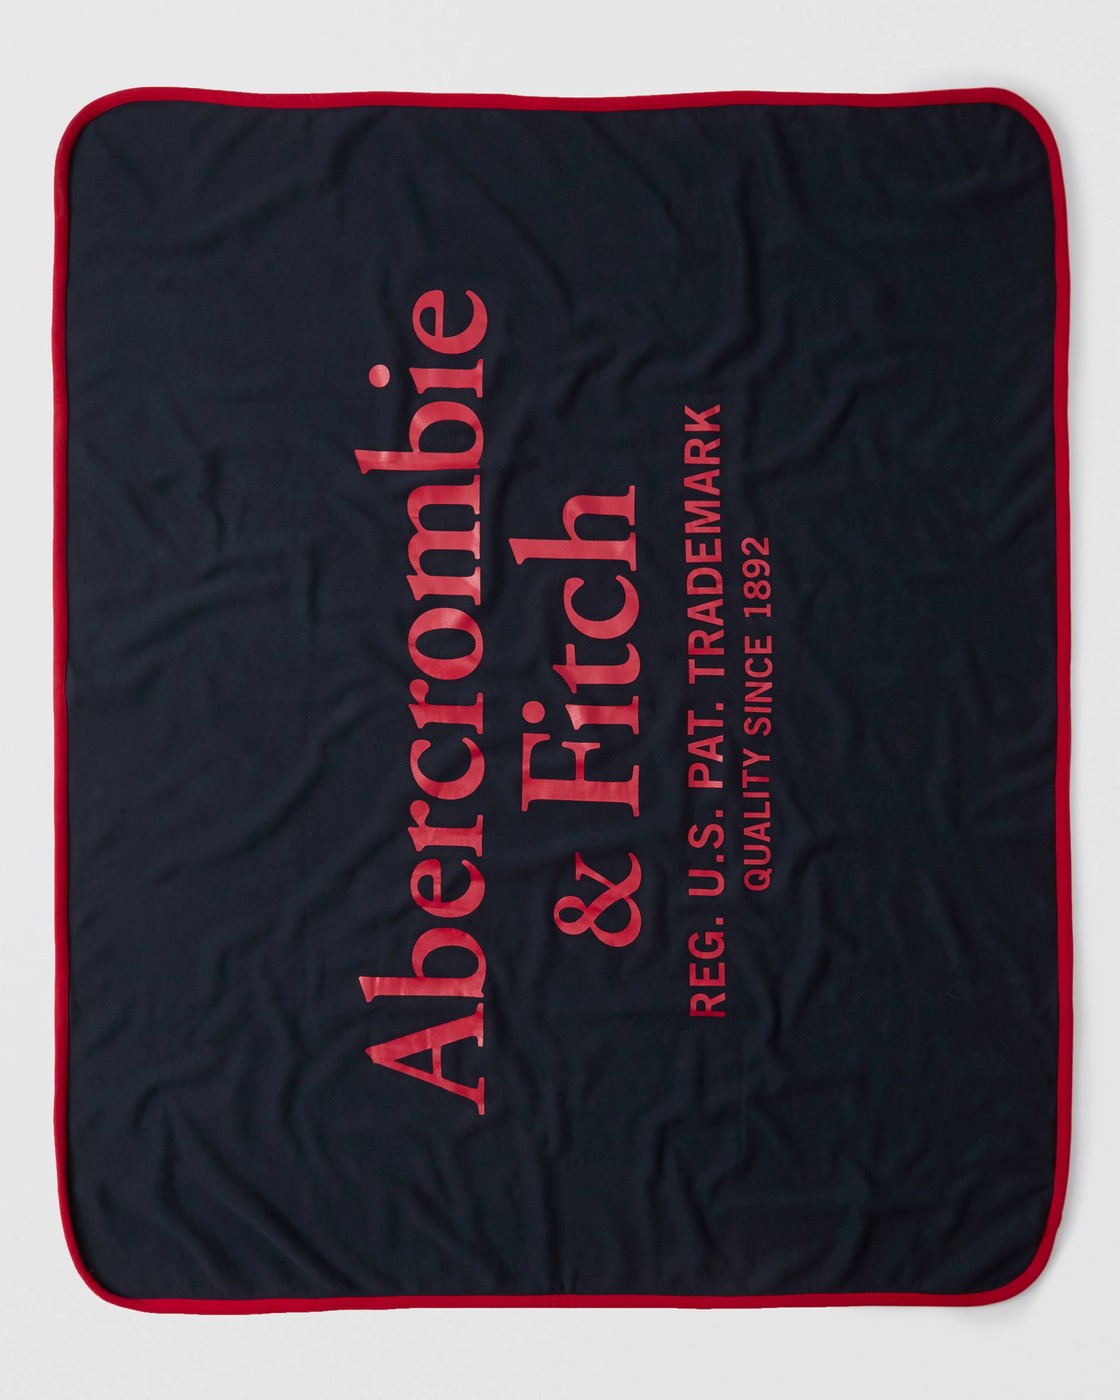 Плед Abercrombie & Fitch